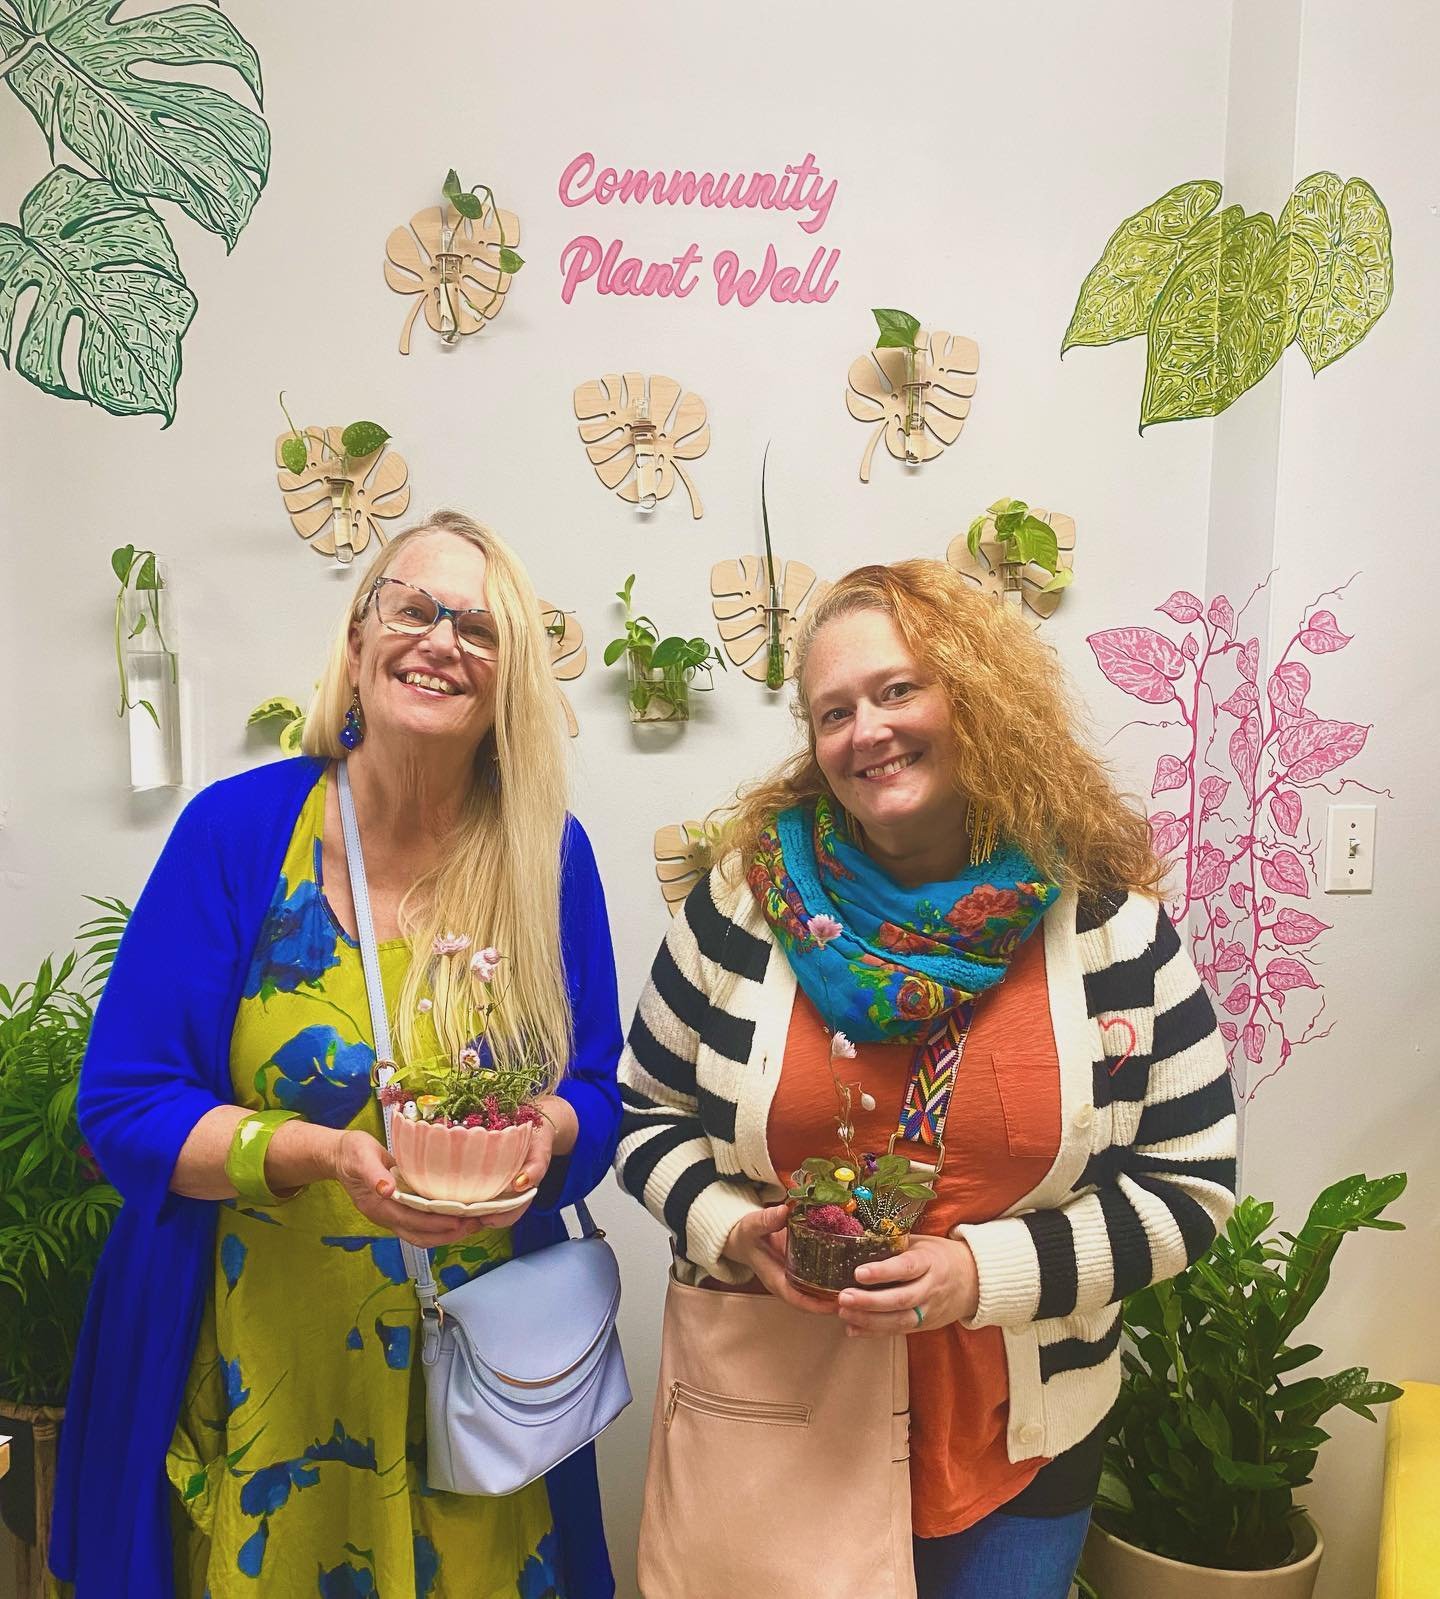 Lea of @bluehuestudio, who painted our community wall mural &amp; her beautiful mom. It was a fun day meeting moms &amp; spending time with everyone celebrating motherhood &amp; love in a variety of ways. 

#indigroplants #plantshop #mothersday #comm